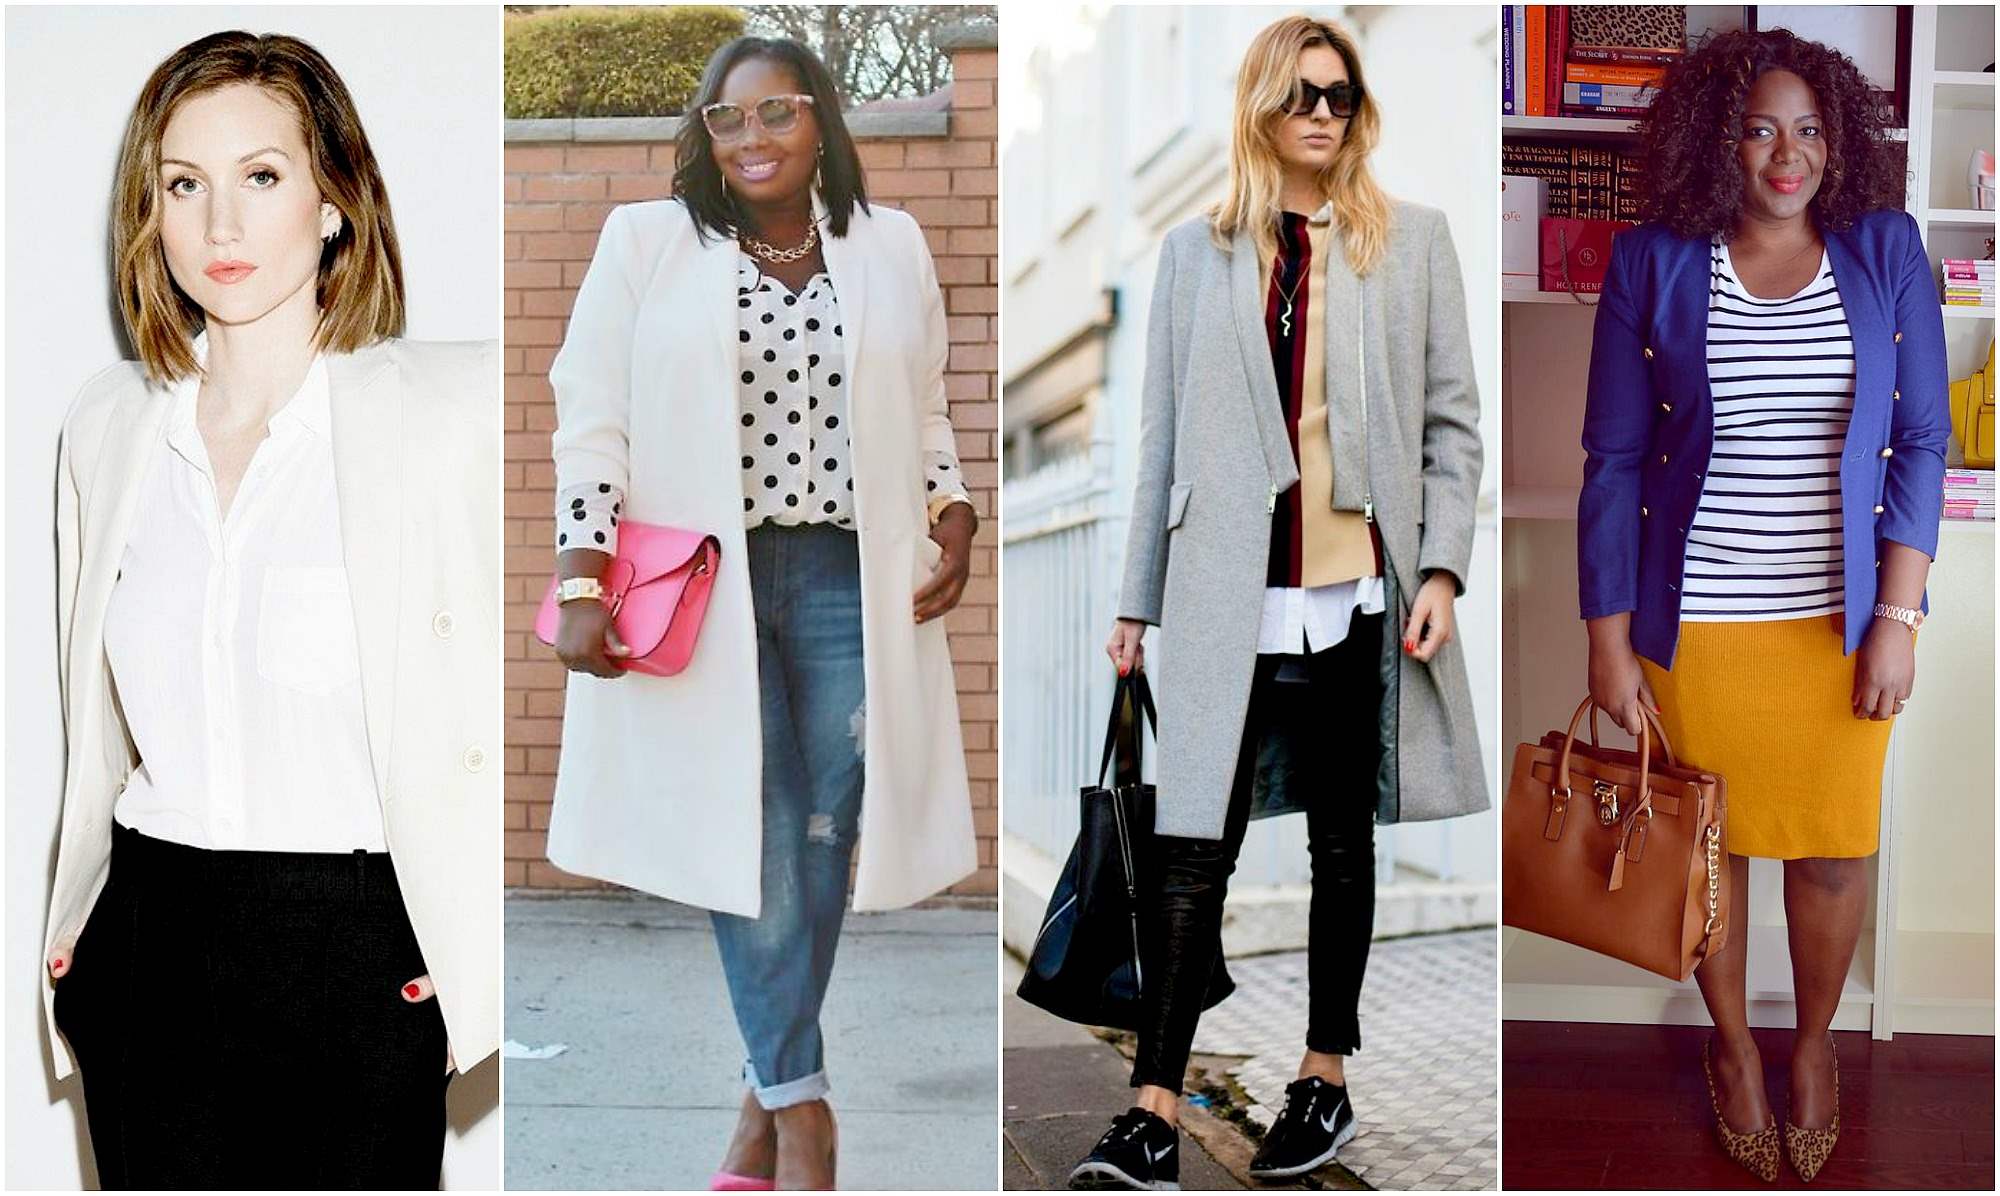 Steal Her Style: Hipster • Suger Coat It